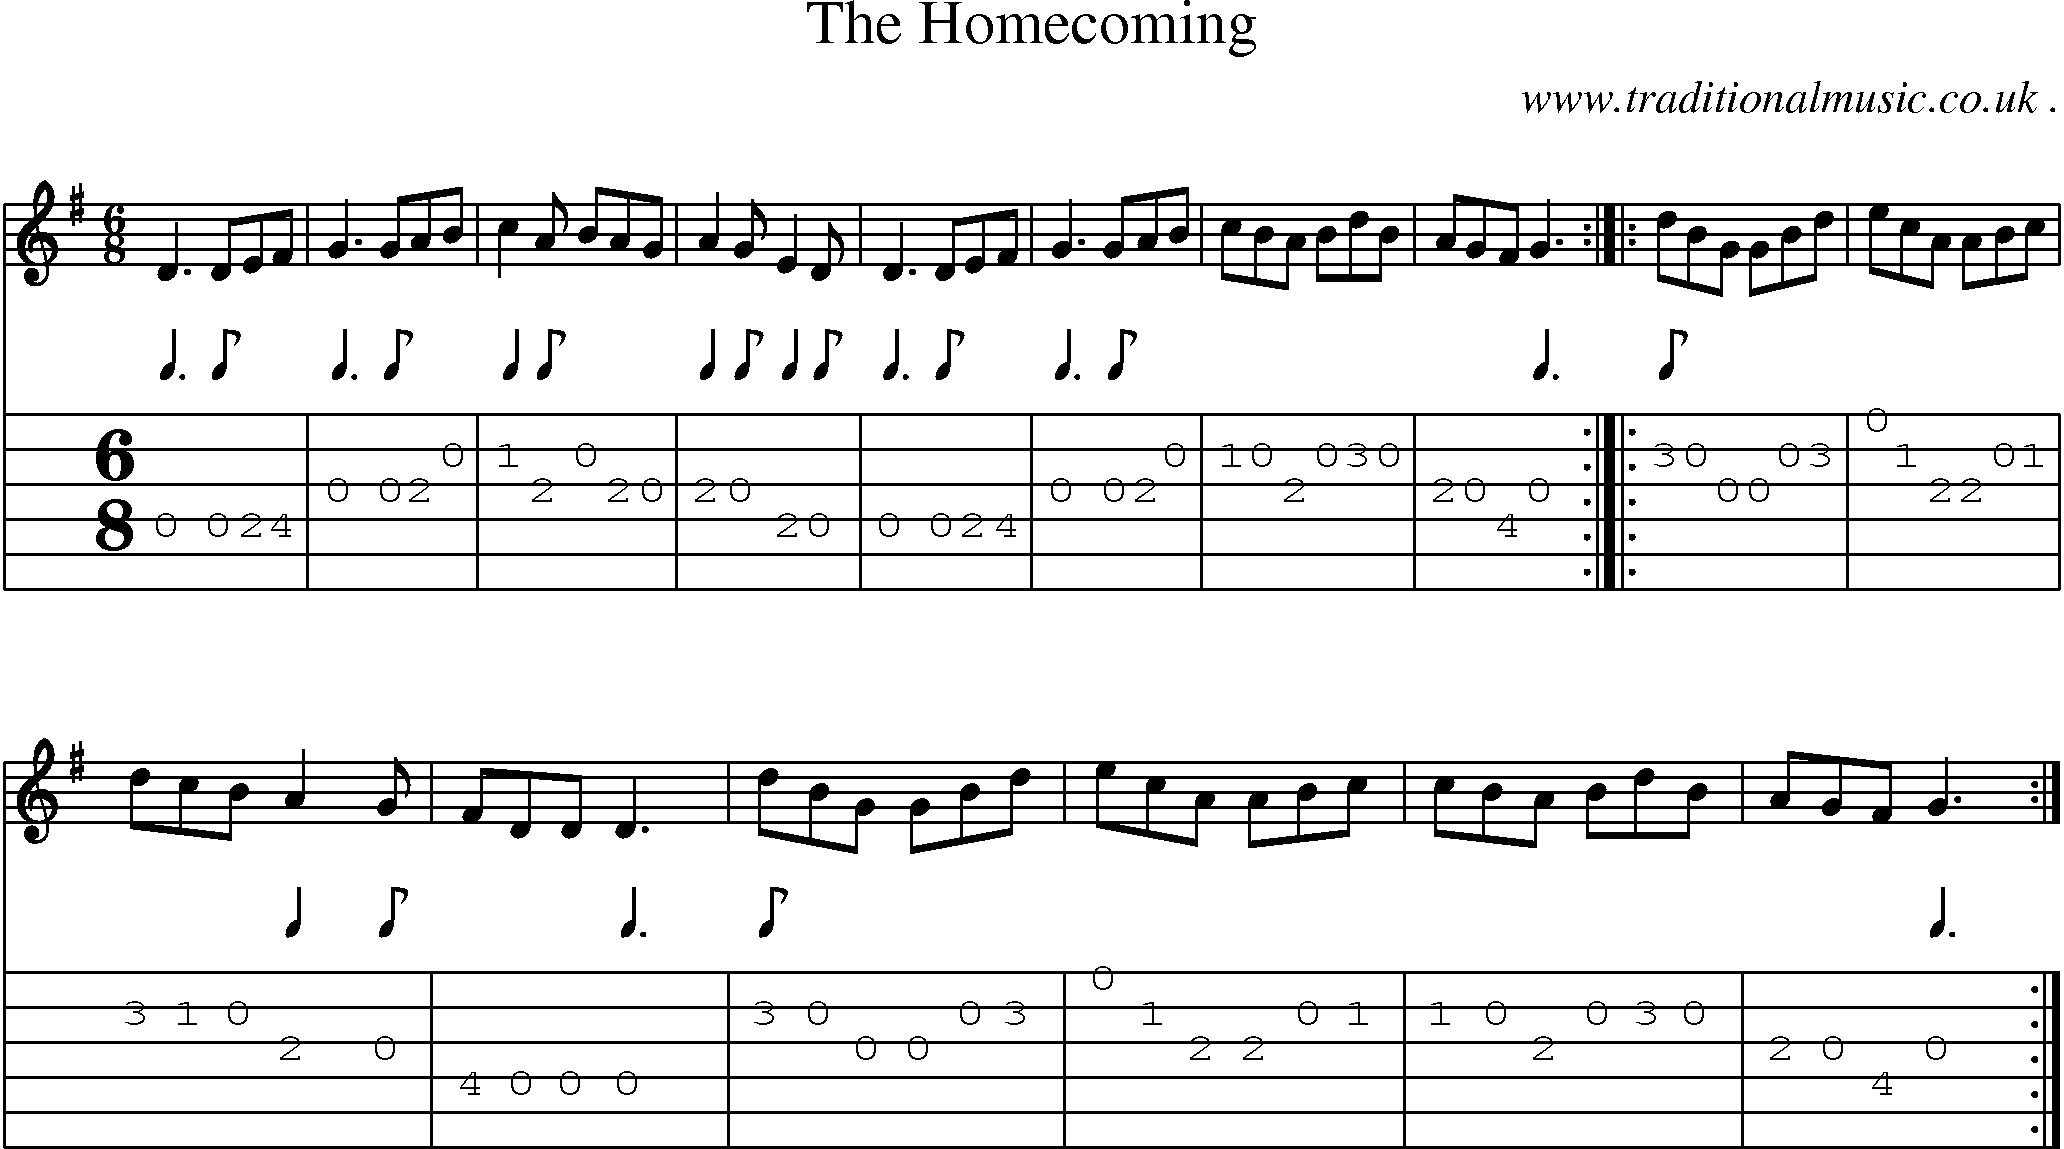 Sheet-Music and Guitar Tabs for The Homecoming